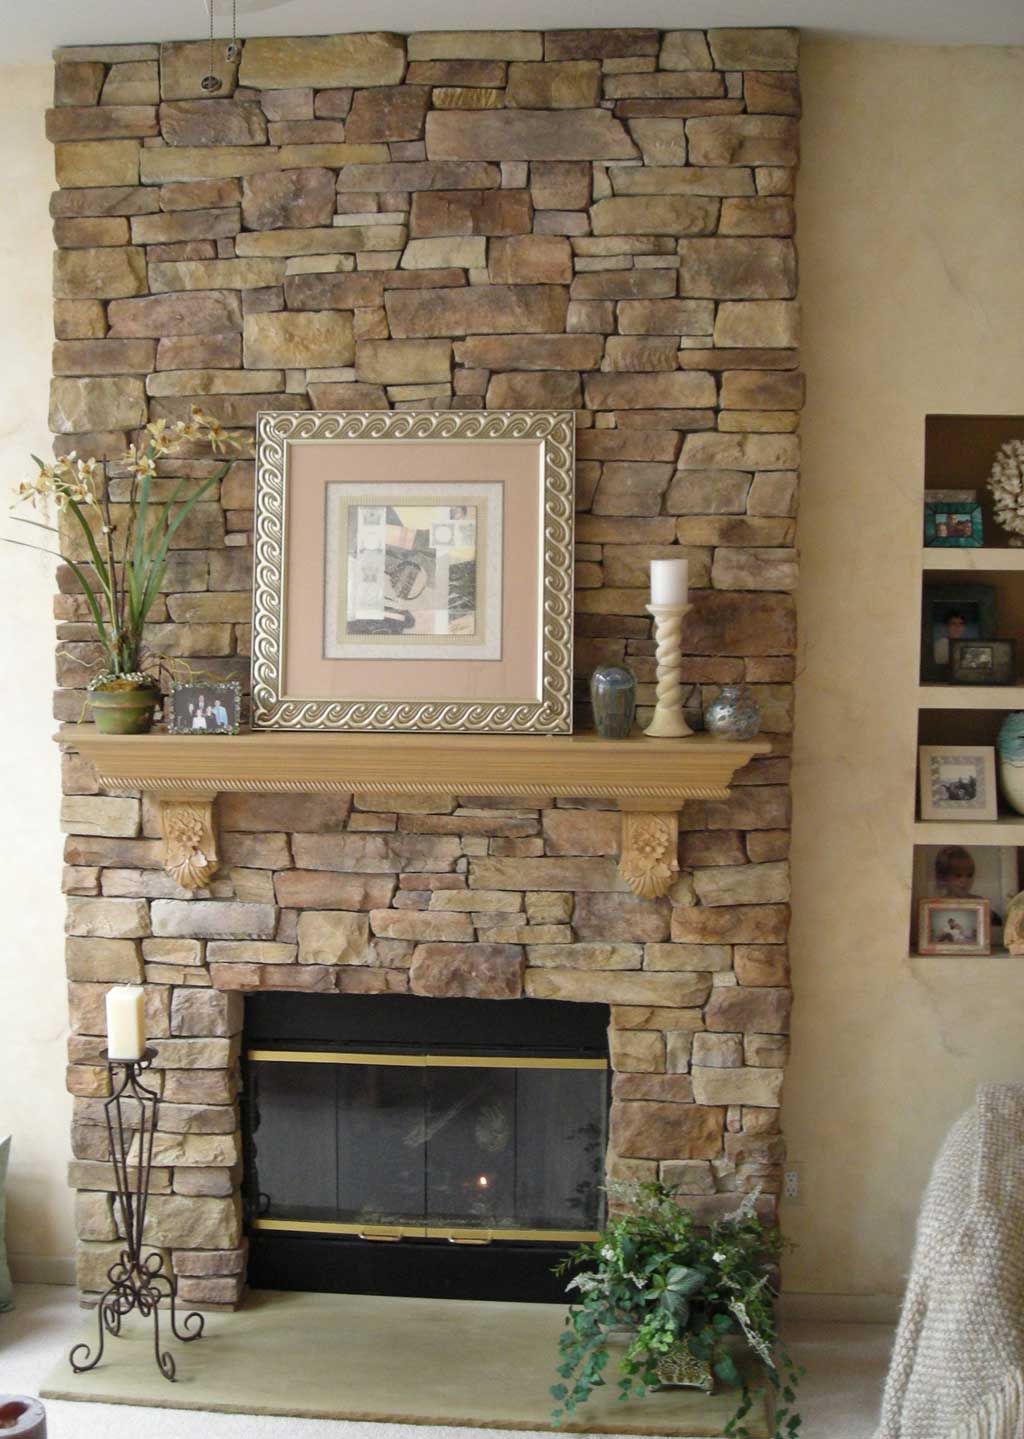 Cover Brick Fireplace with Stone Lovely Stone Veneer Fireplace Design Fireplace In 2019